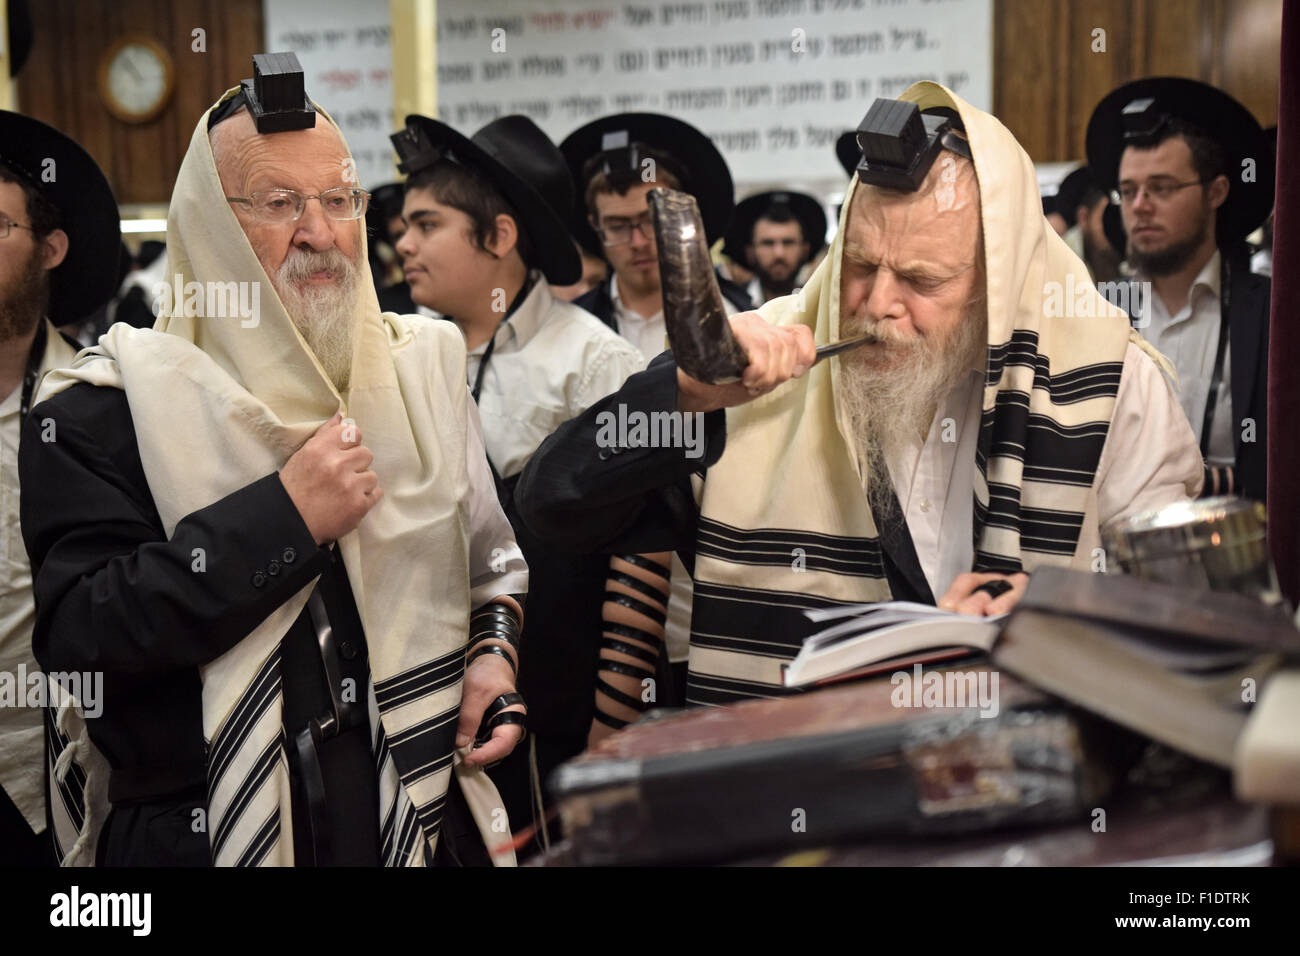 A very religious Jewish Rabbi blowing a shofar - ram's horn - at morning services before the New Year. In Brooklyn, New York Stock Photo - Alamy